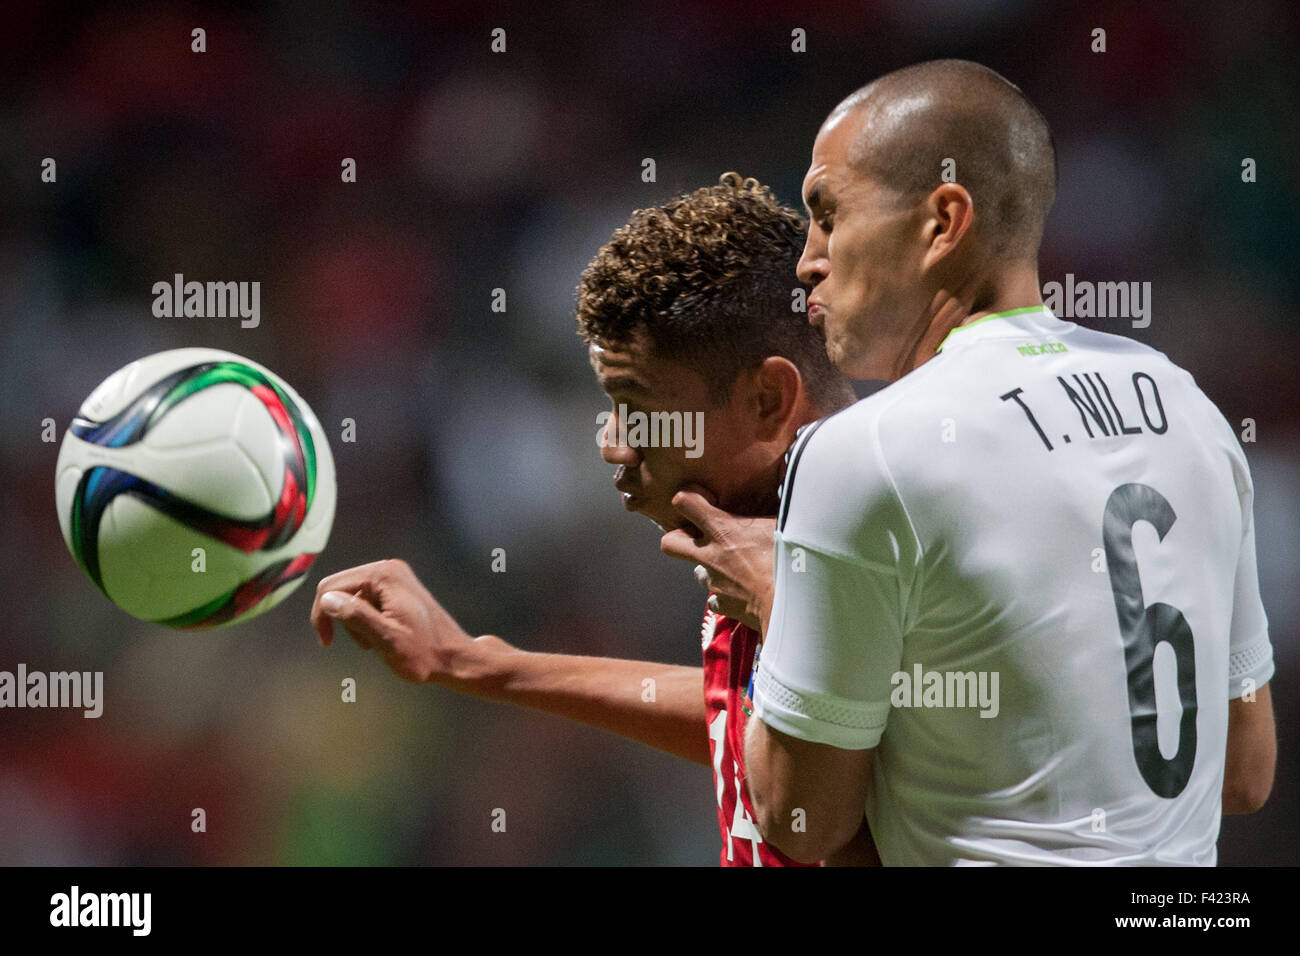 Toluca, Mexico. 13th Oct, 2015. Jorge Torres Nilo (R) of Mexico vies for the ball with Valentin Pimentel of Panama during an international friendly match held at Nemesio Diez Stadium, in Toluca City, capital of the State of Mexico, Mexico, on Oct. 13, 2015. Mexico won 1-0. Credit:  Pedro Mera/Xinhua/Alamy Live News Stock Photo